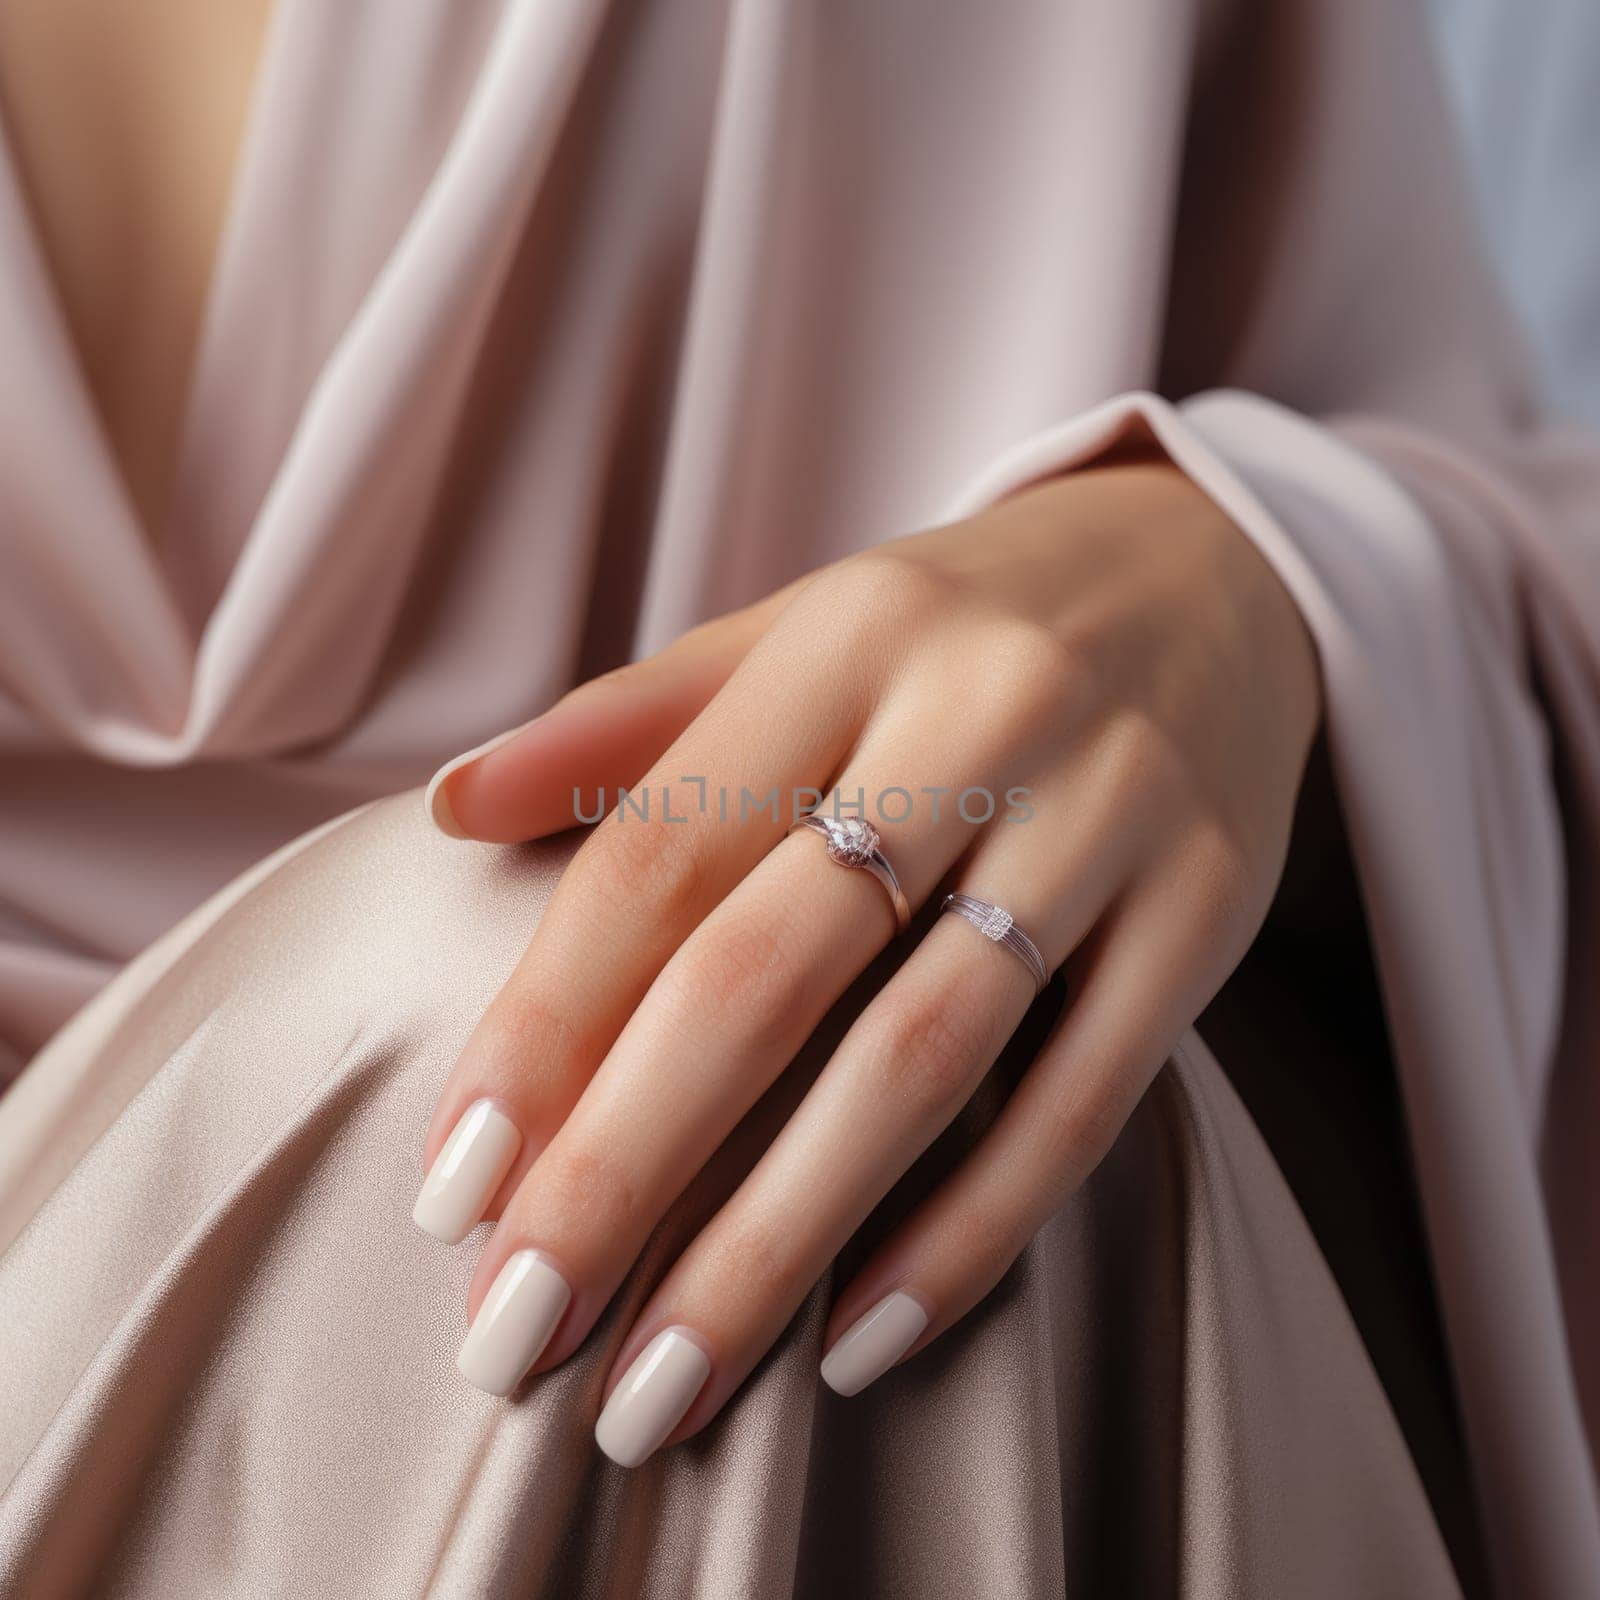 Close-up of the hands of a young woman with a gentle nude manicure on her nails. ai generated